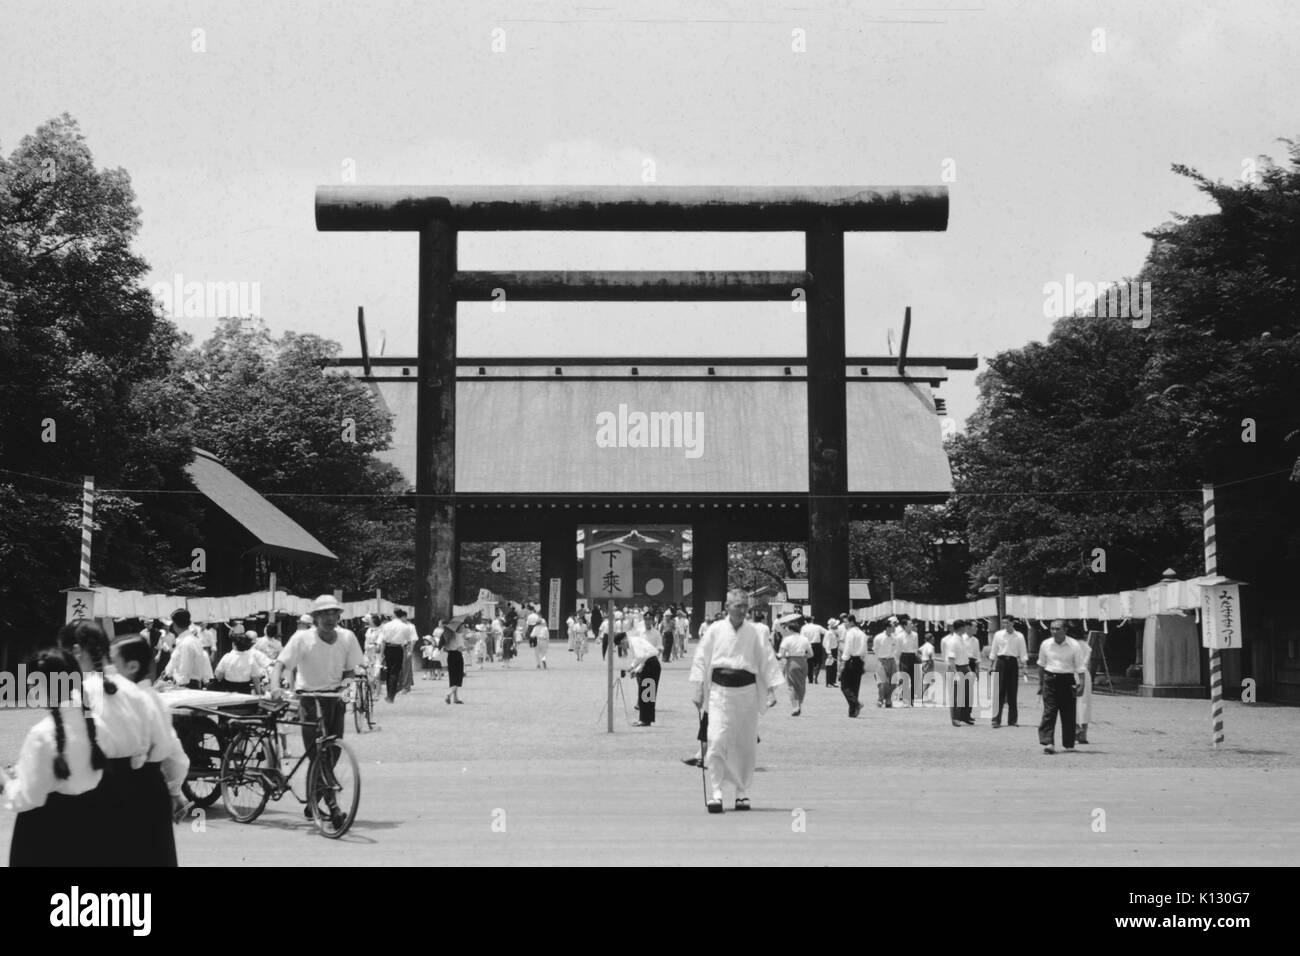 Crowd of Japanese visitors walking on a street in front of the gateway arch of a temple, wearing black and white attire, one man pushing a bicycle, another holding a wooden sign, unfurled prayer scrolls visible, Japan, 1952. Stock Photo